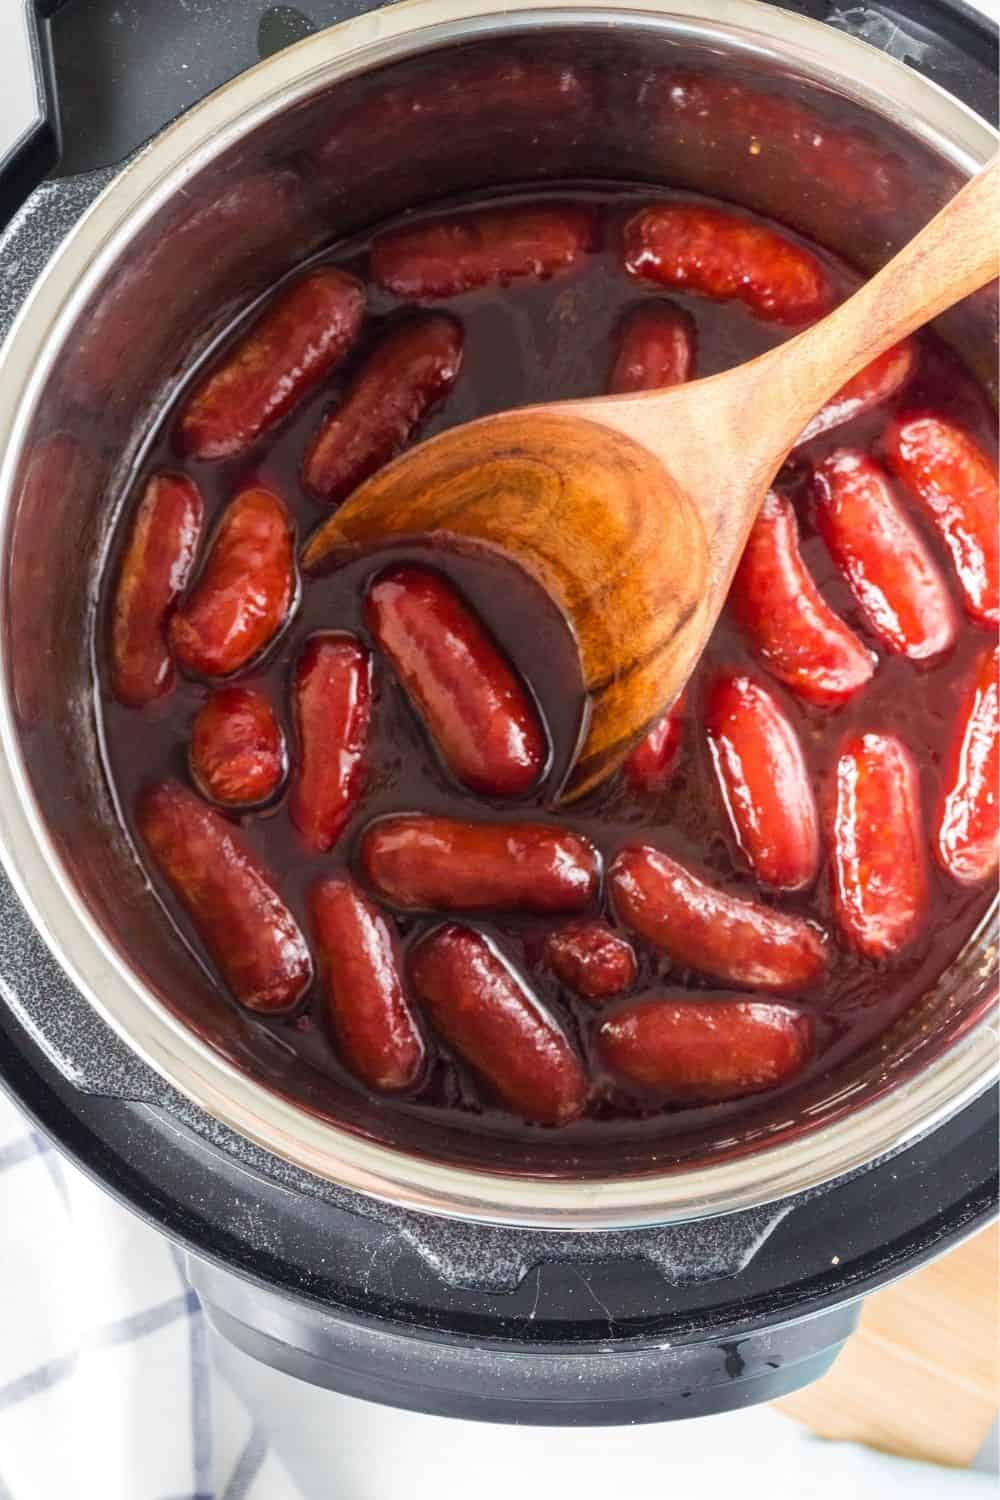 Freshly cooked Instant Pot cocktail weenies in sauce, ready to be served